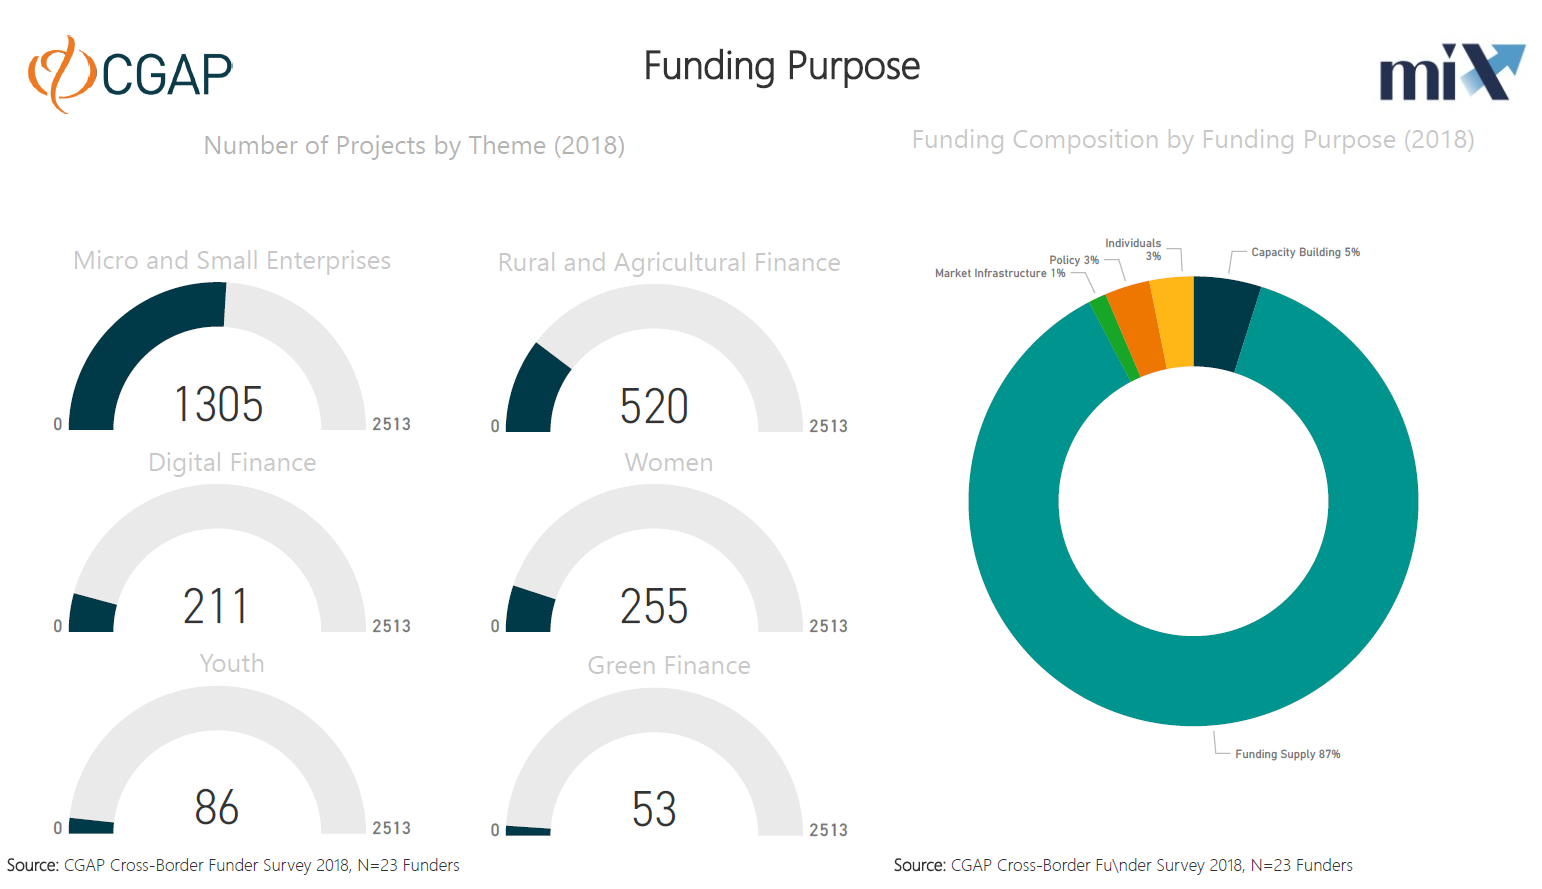 What do funders fund? (Themes, funding purpose)